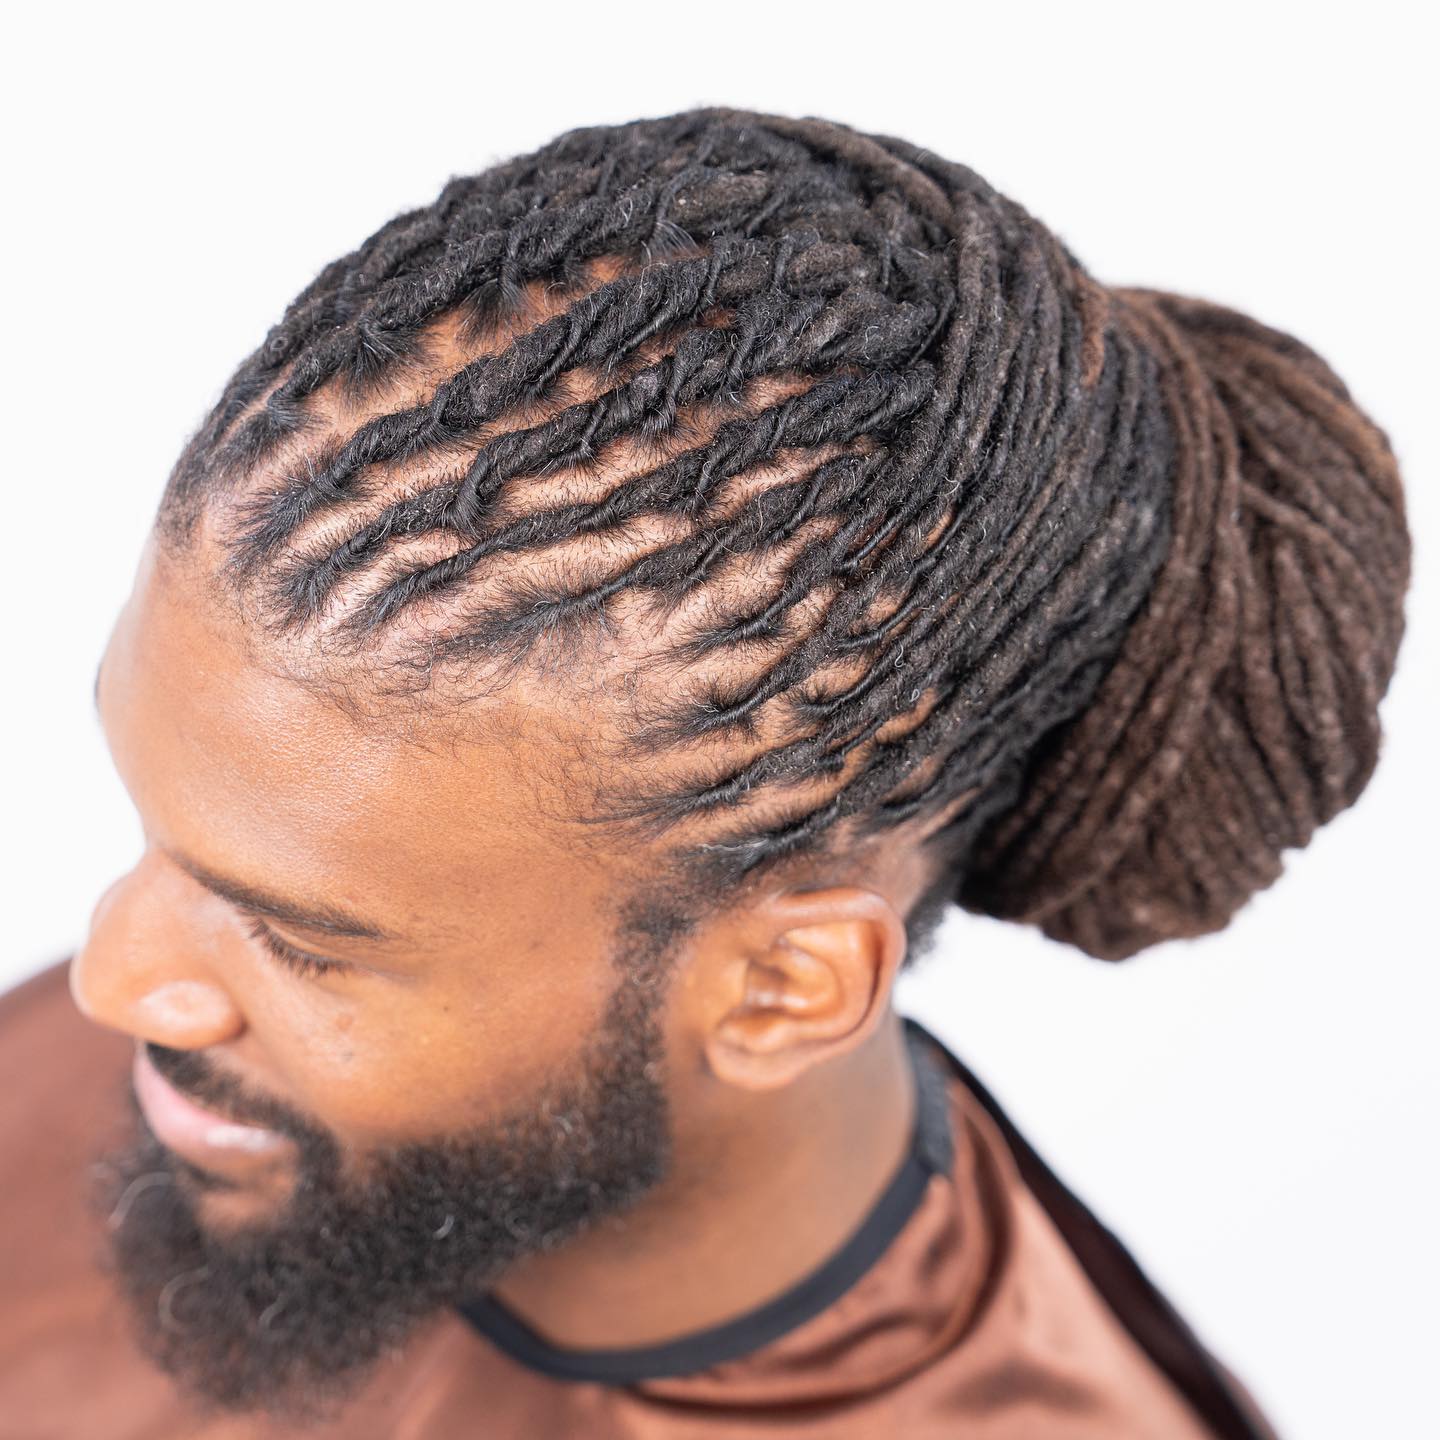 Image of Flat Twist Dreads inspired by Dreadlocks Hairstyles for Men